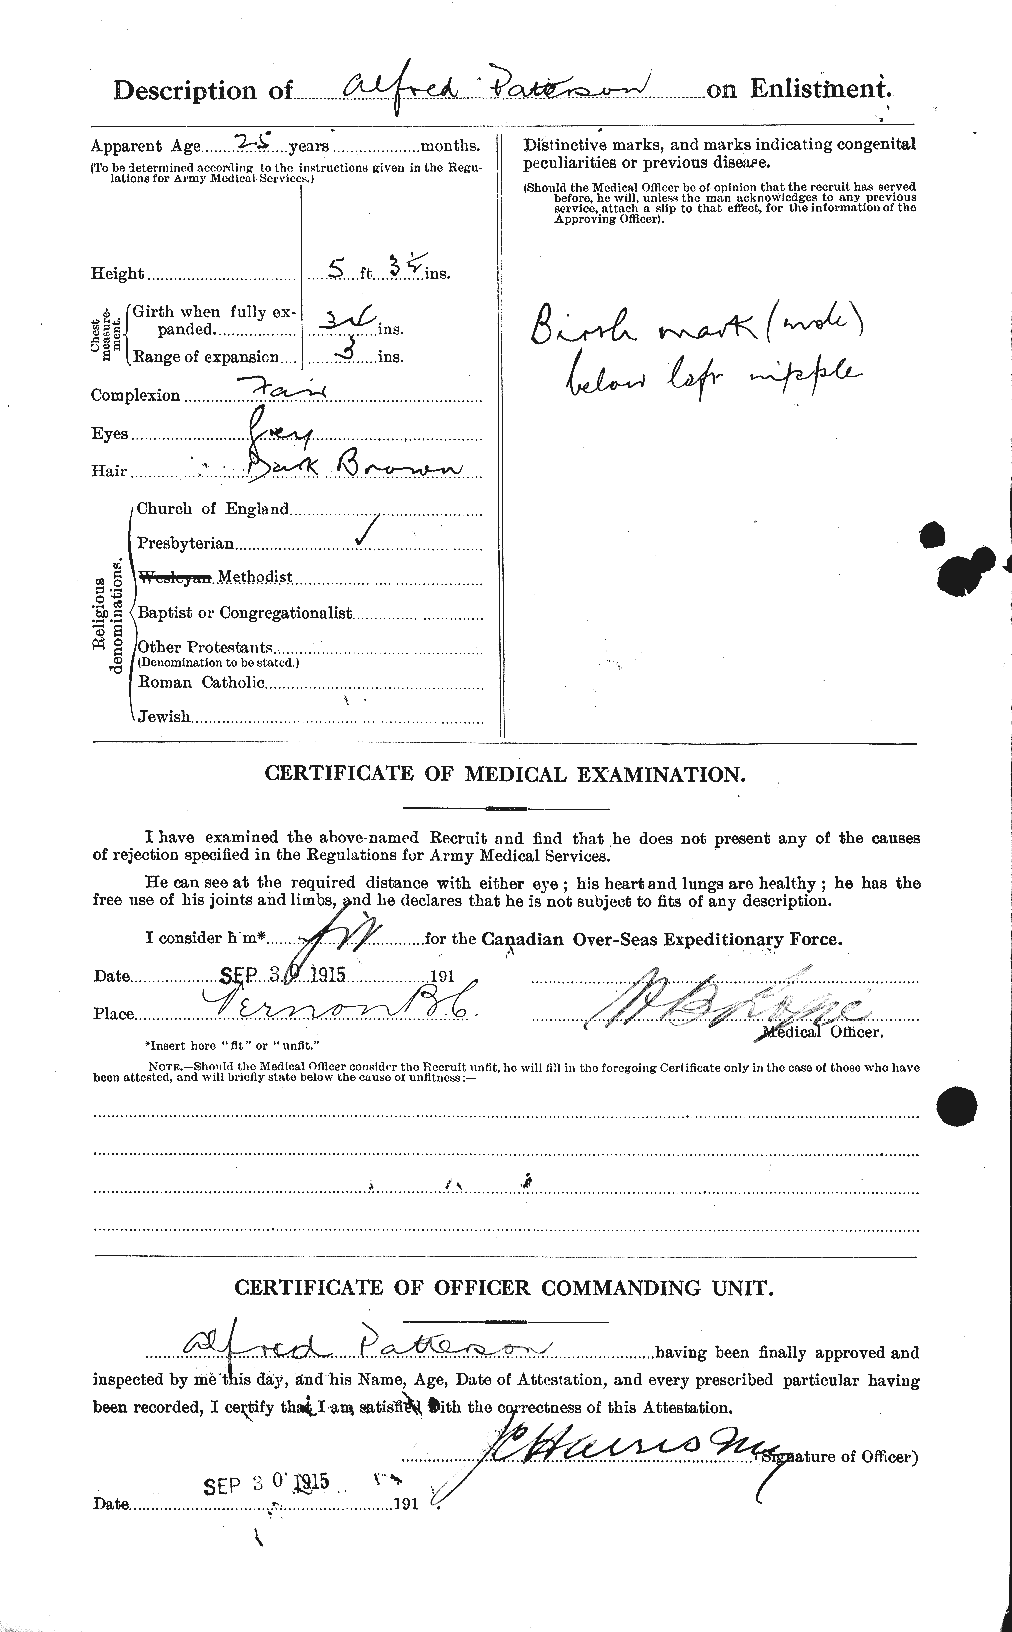 Personnel Records of the First World War - CEF 568215b